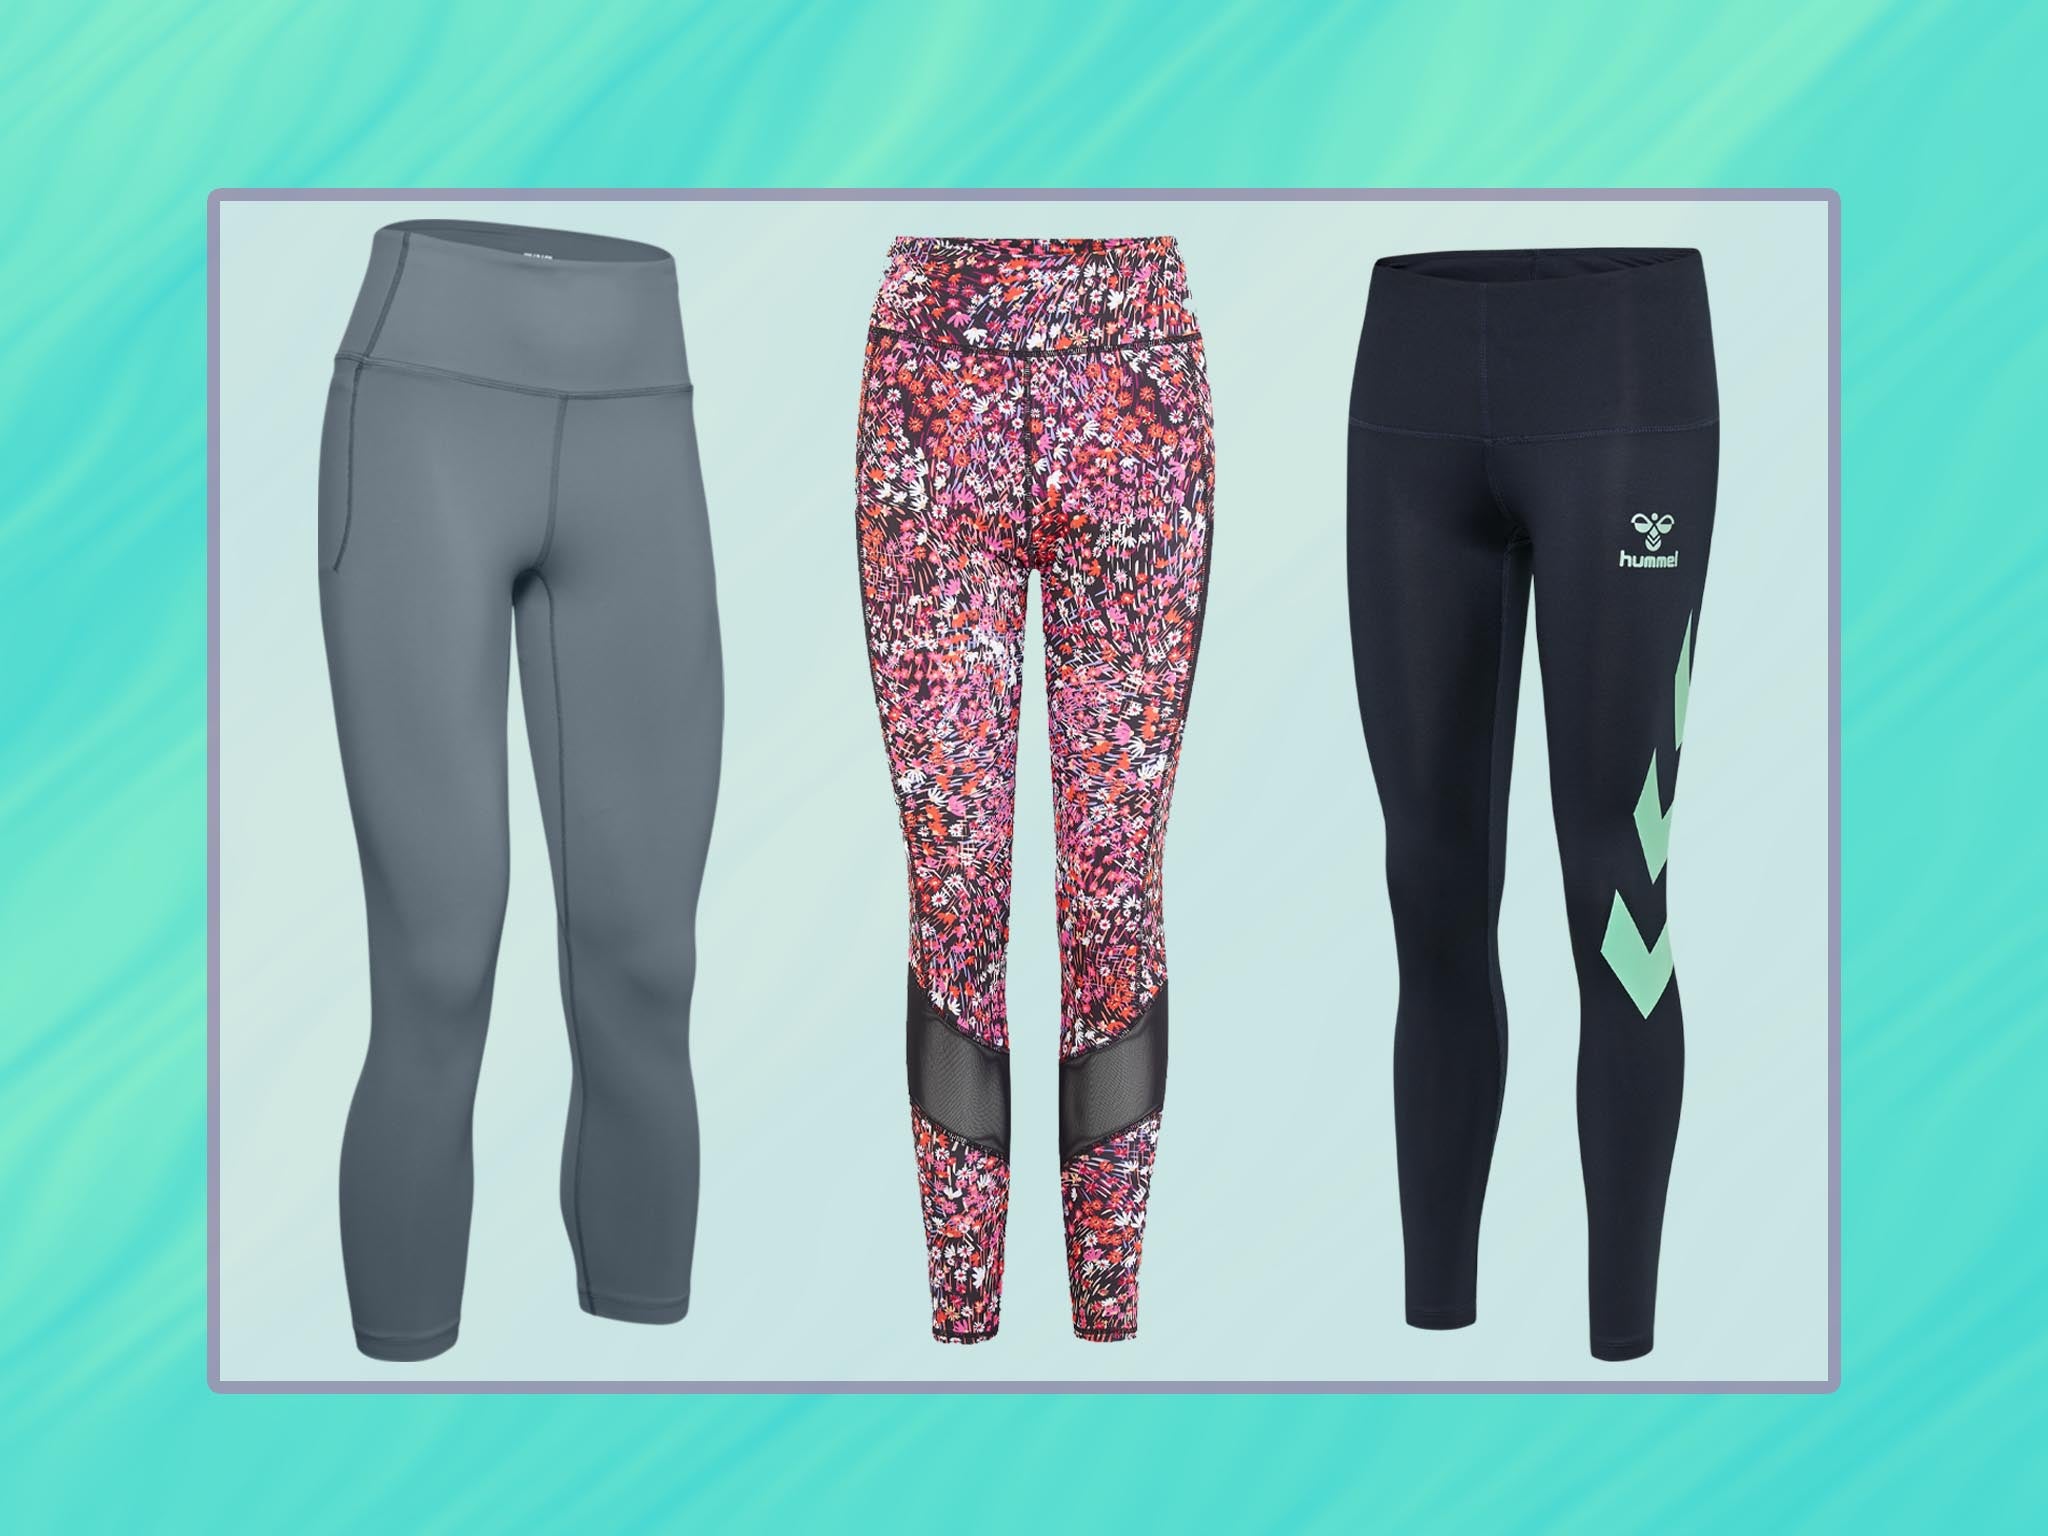 women's sports leggings with pockets